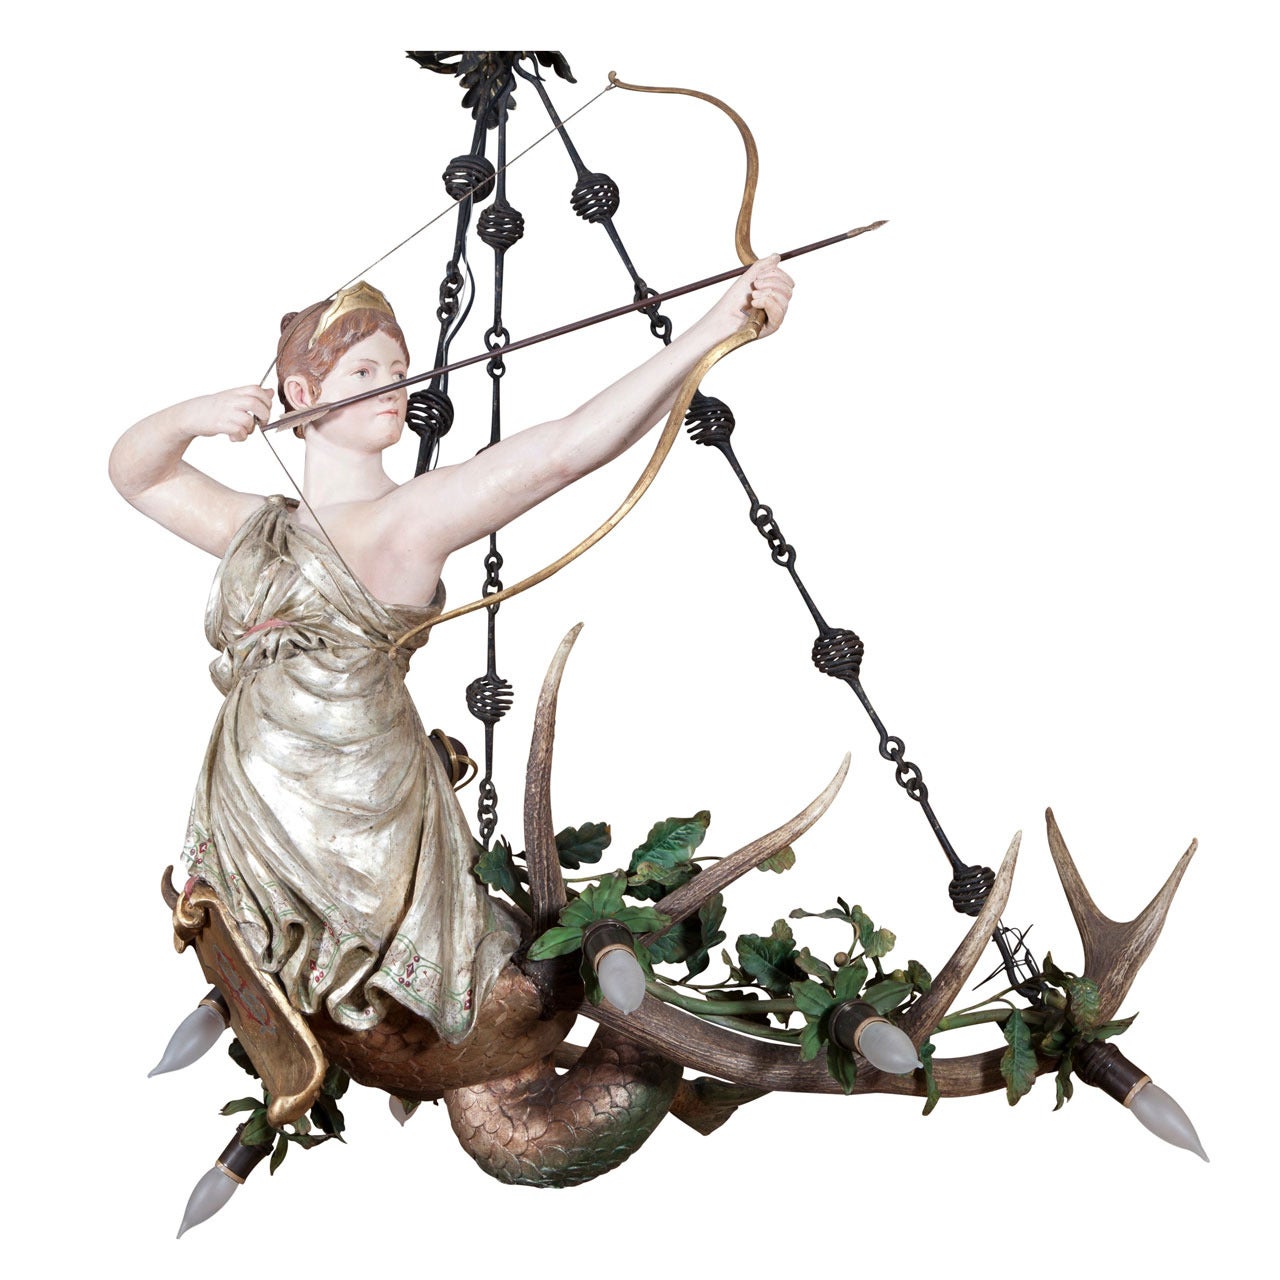 Lusterweibchen “Diana” Goddess of the Hunt with Antlers and Metal Work